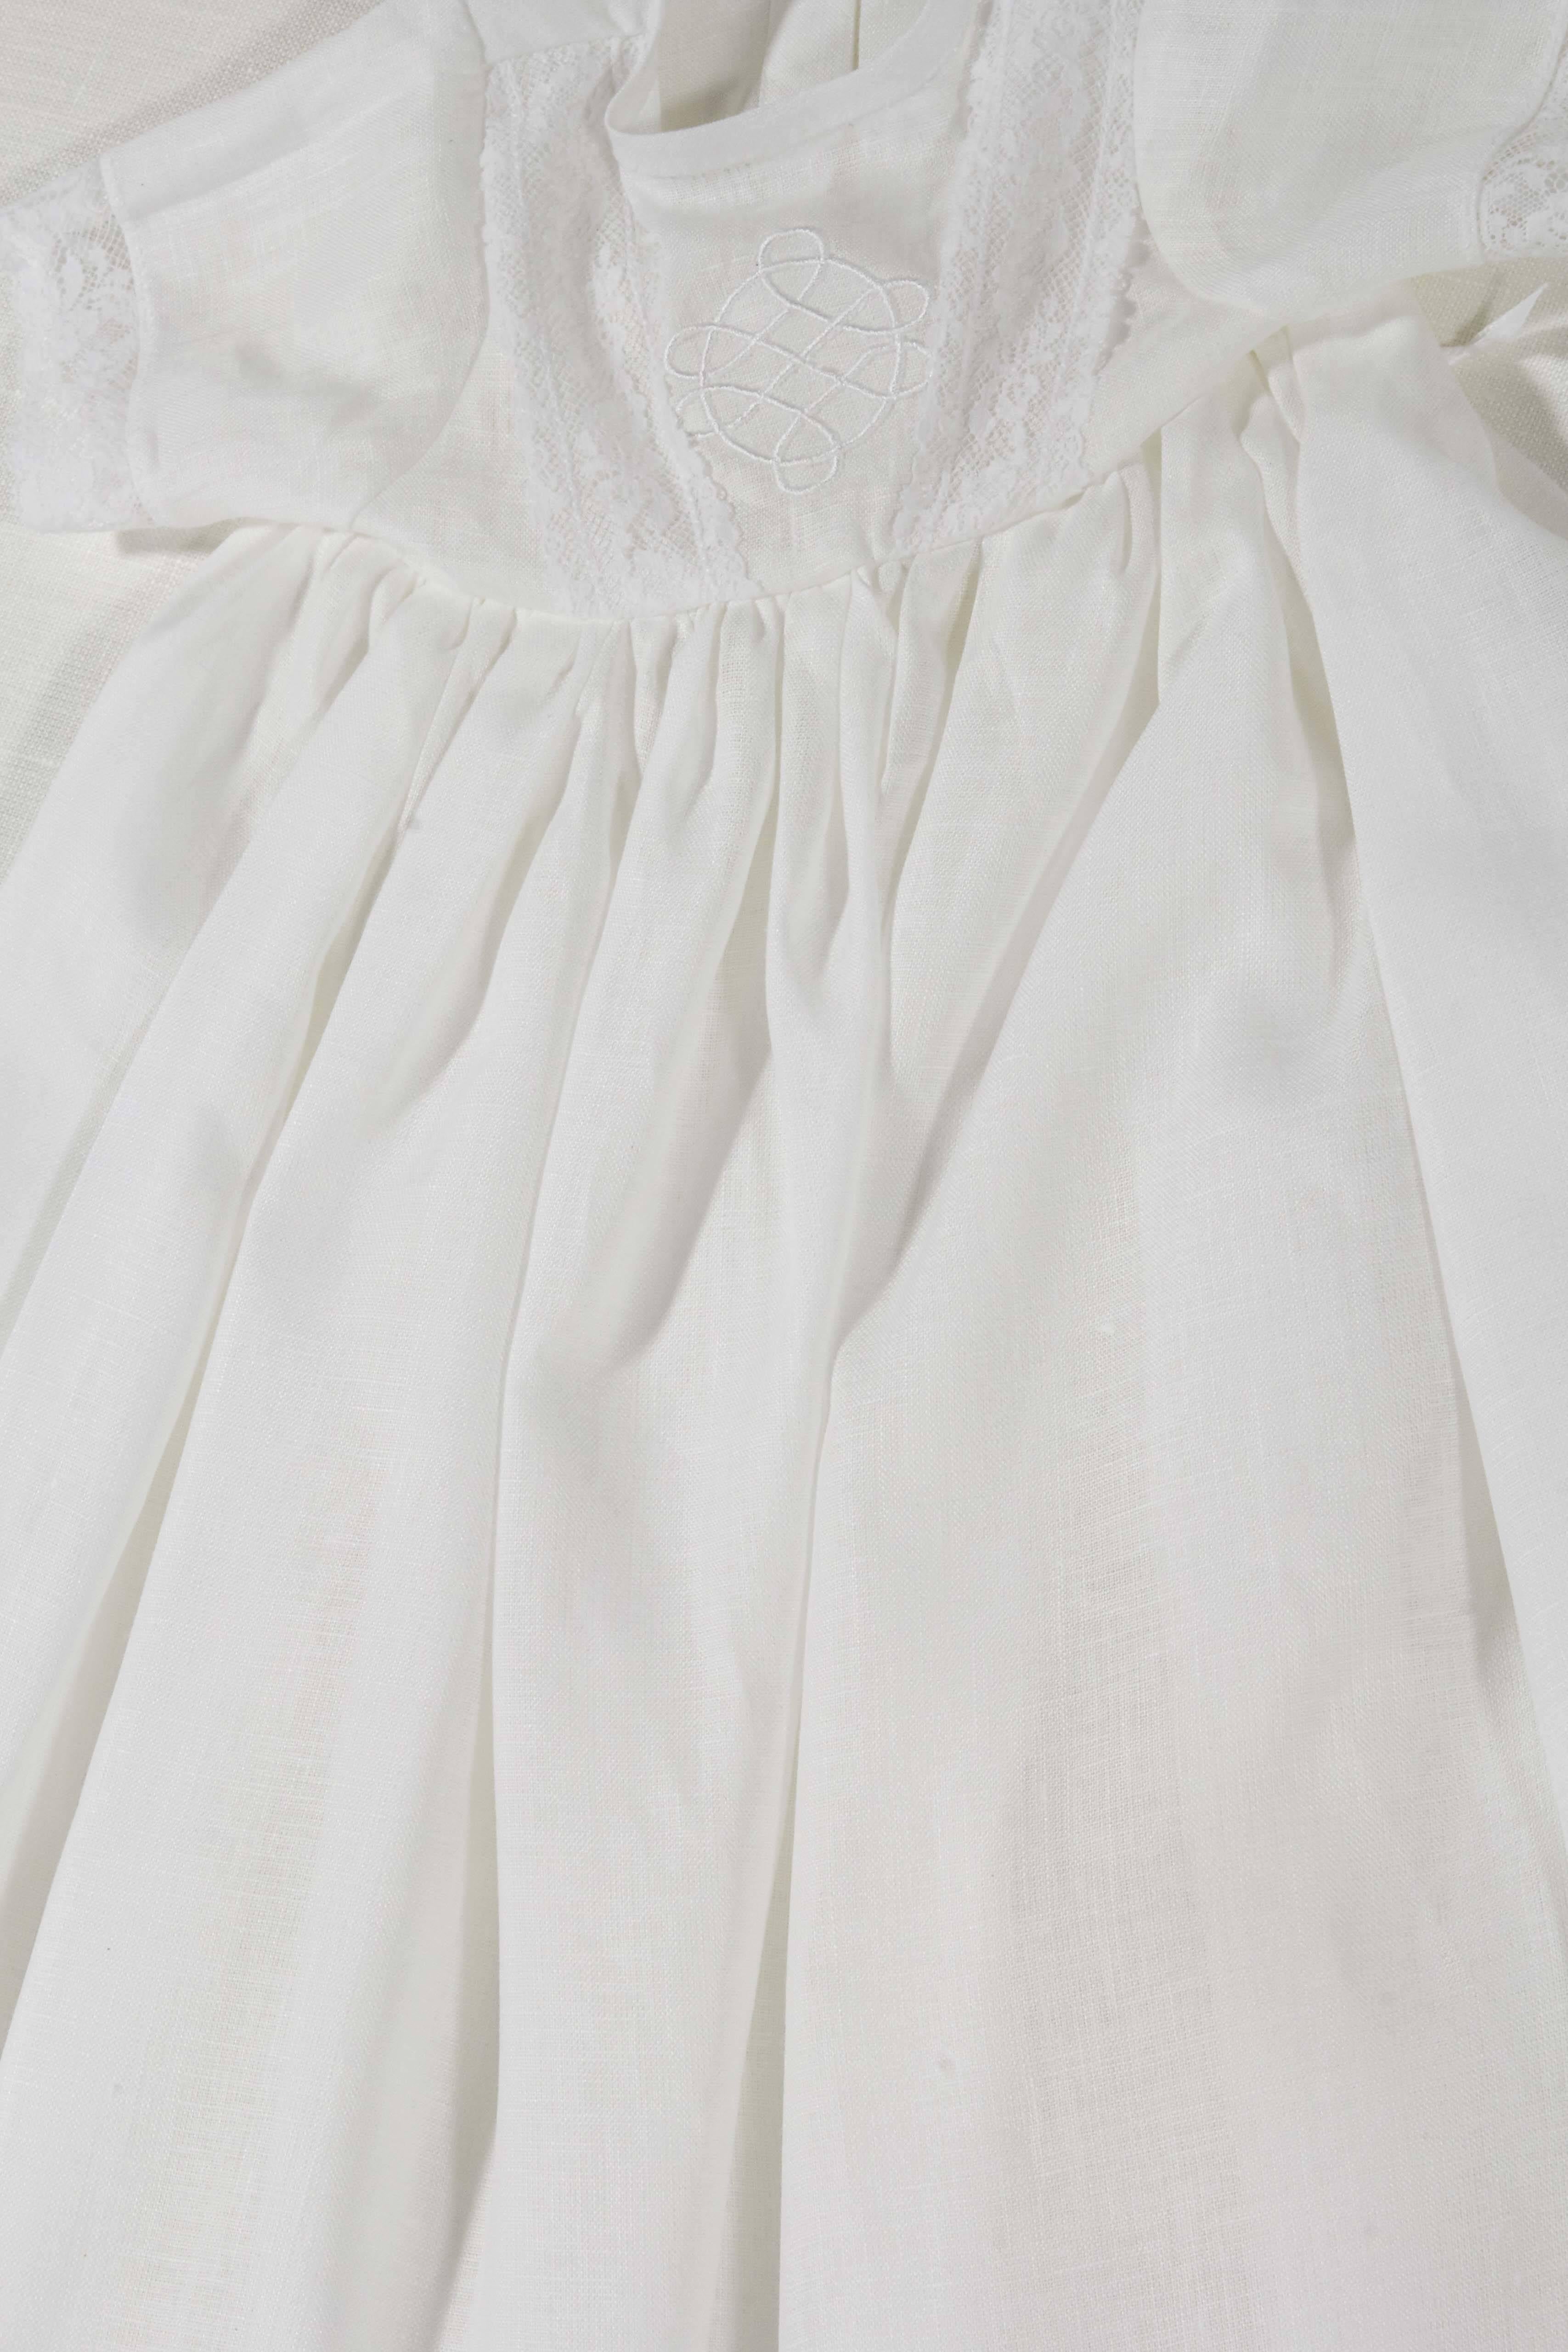 20th Century Framed Child's Christening Gown For Sale